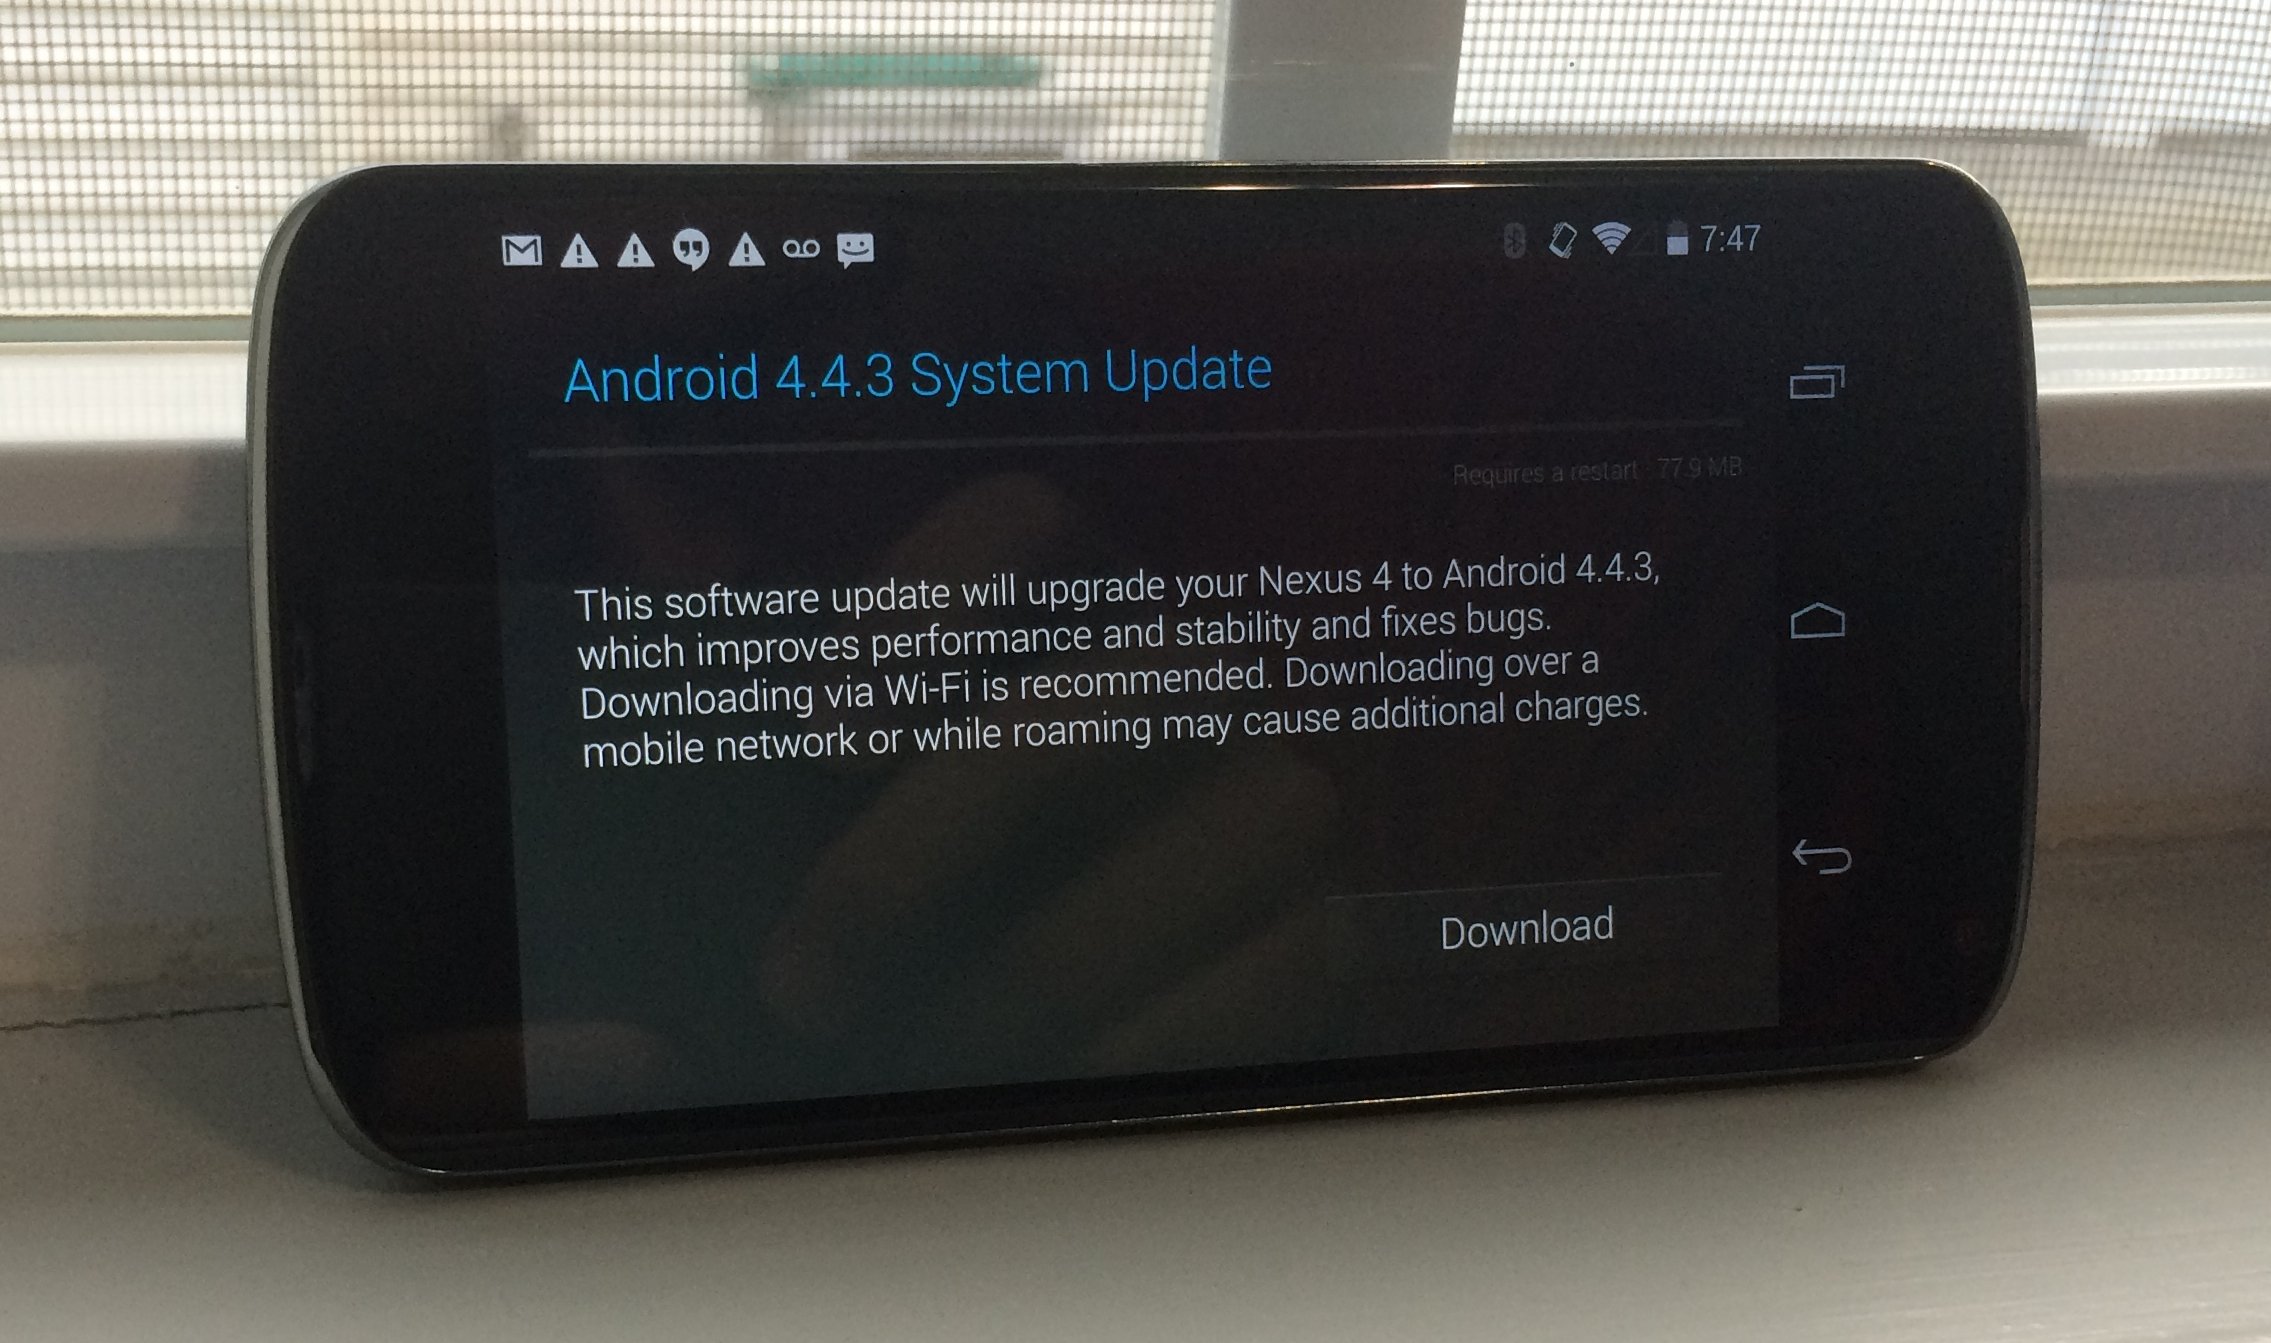 If you want ot install the Nexus 4 Android 4.4.3 update make sure you give yourself time to deal with any issues.